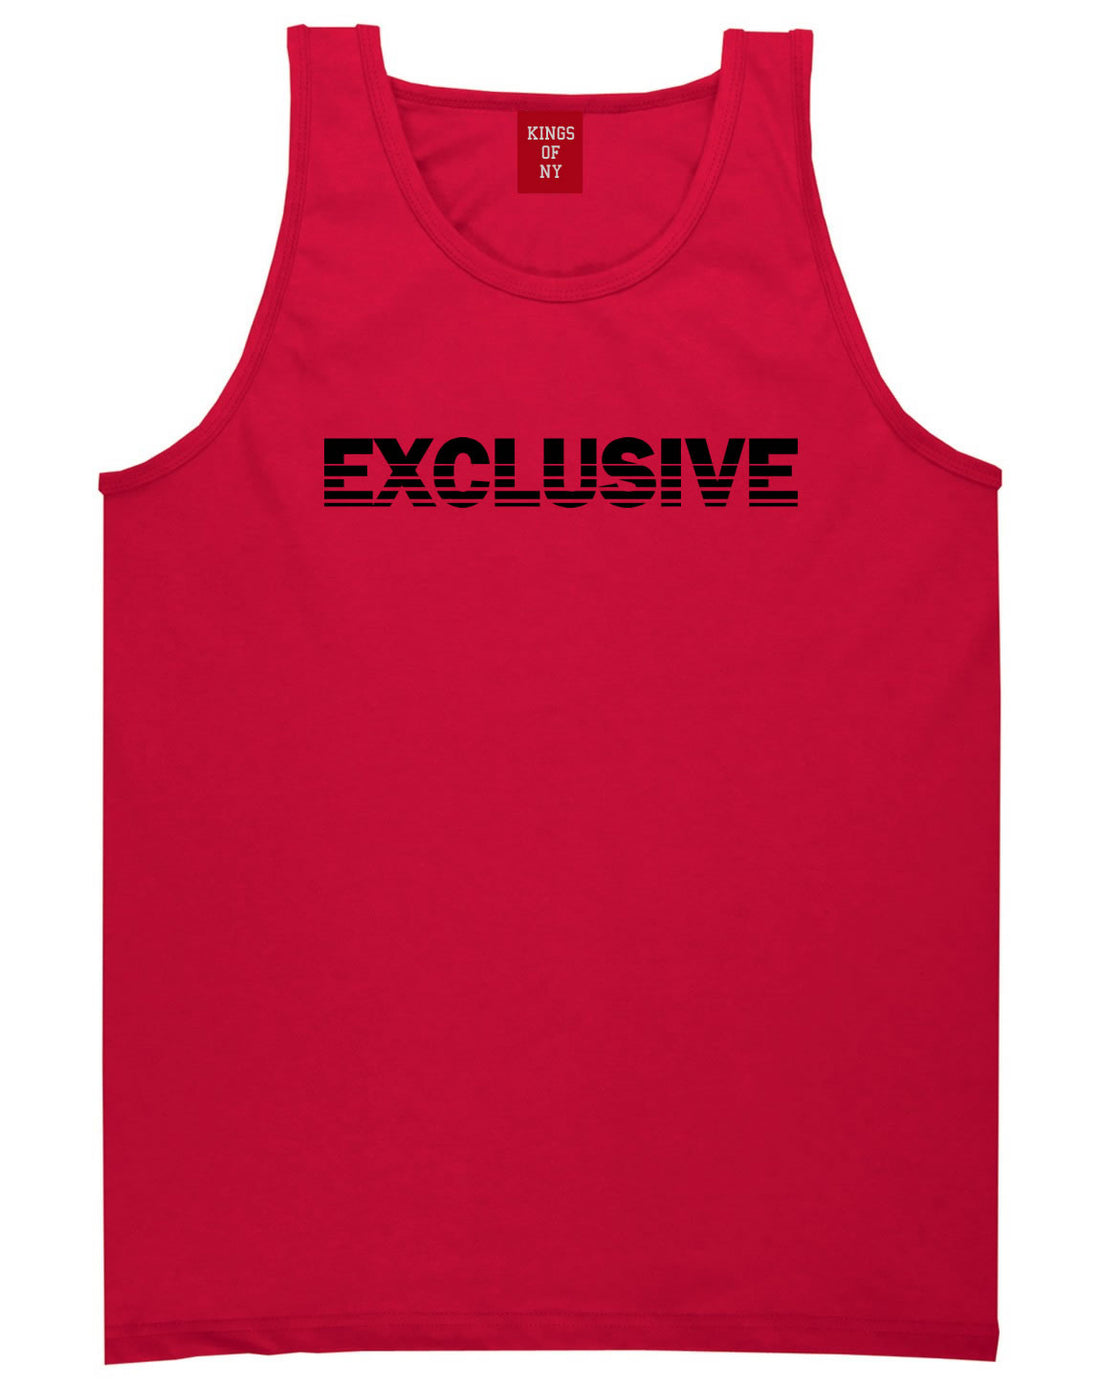 Exclusive Racing Style Tank Top in Red by Kings Of NY